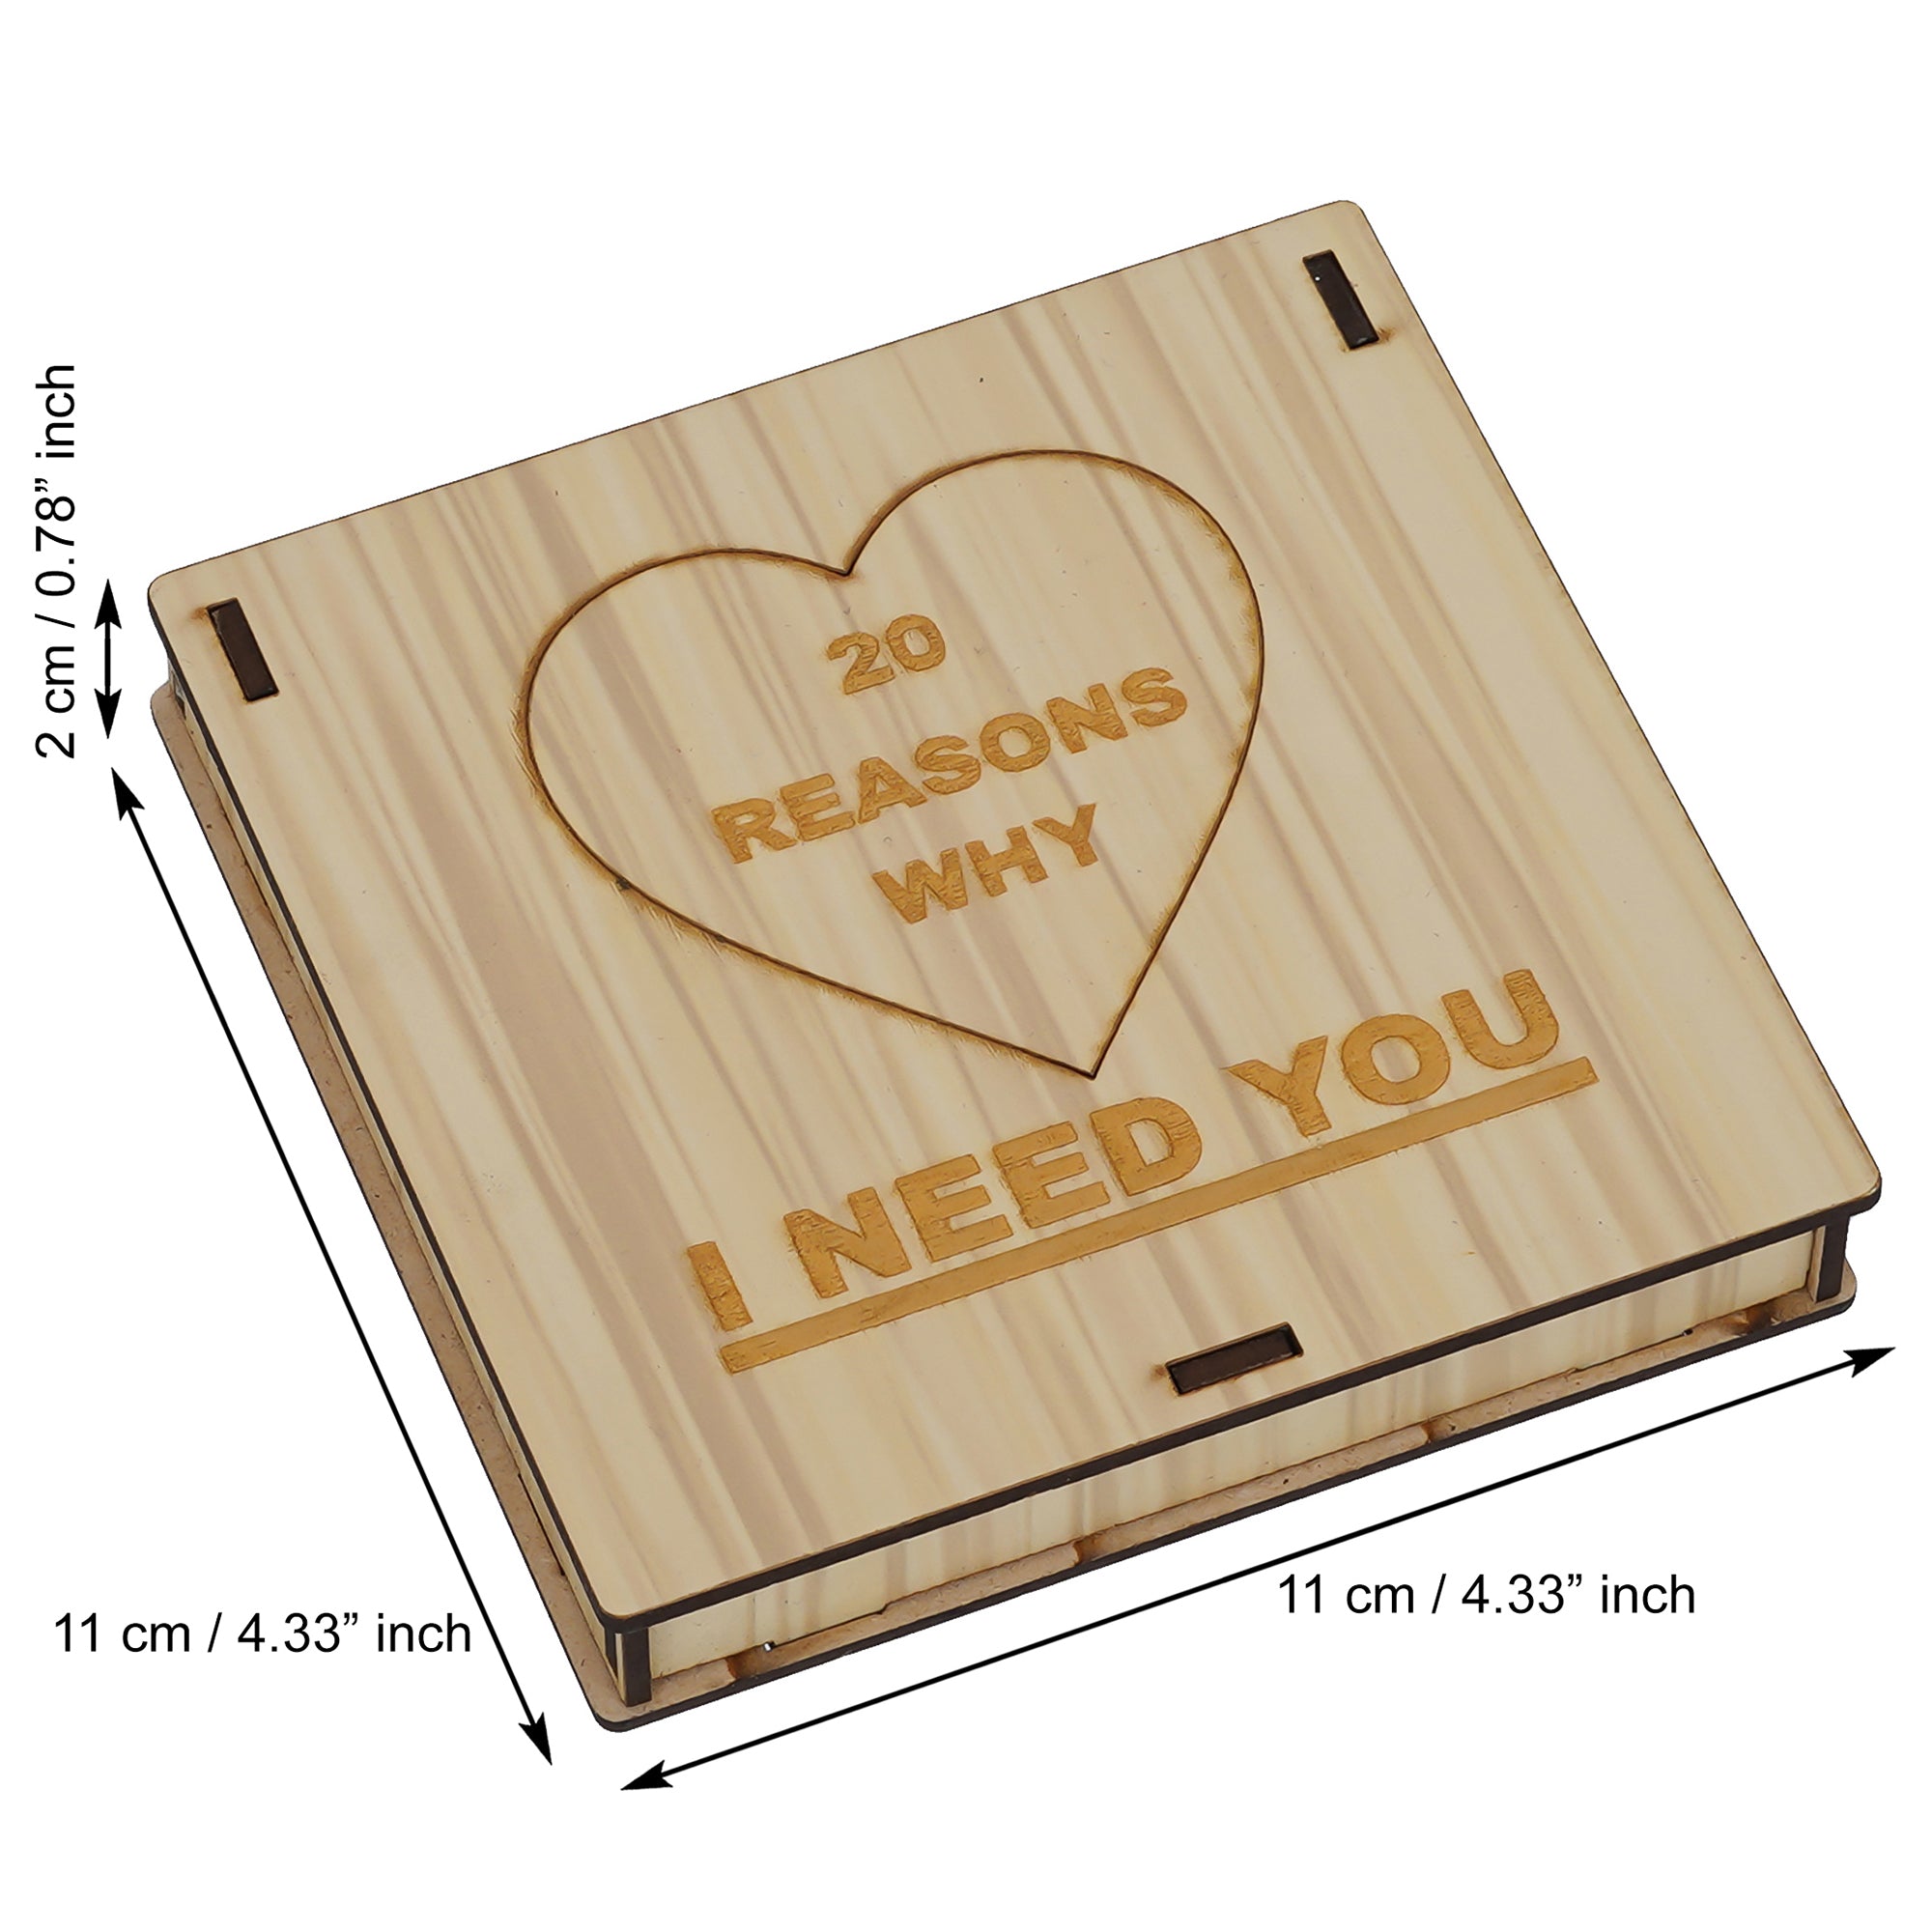 Valentine Combo of Card, "20 Reasons Why I Need You" Printed on Little Hearts Wooden Gift Set, Pink Heart Shaped Gift Box with Teddy and Roses 4